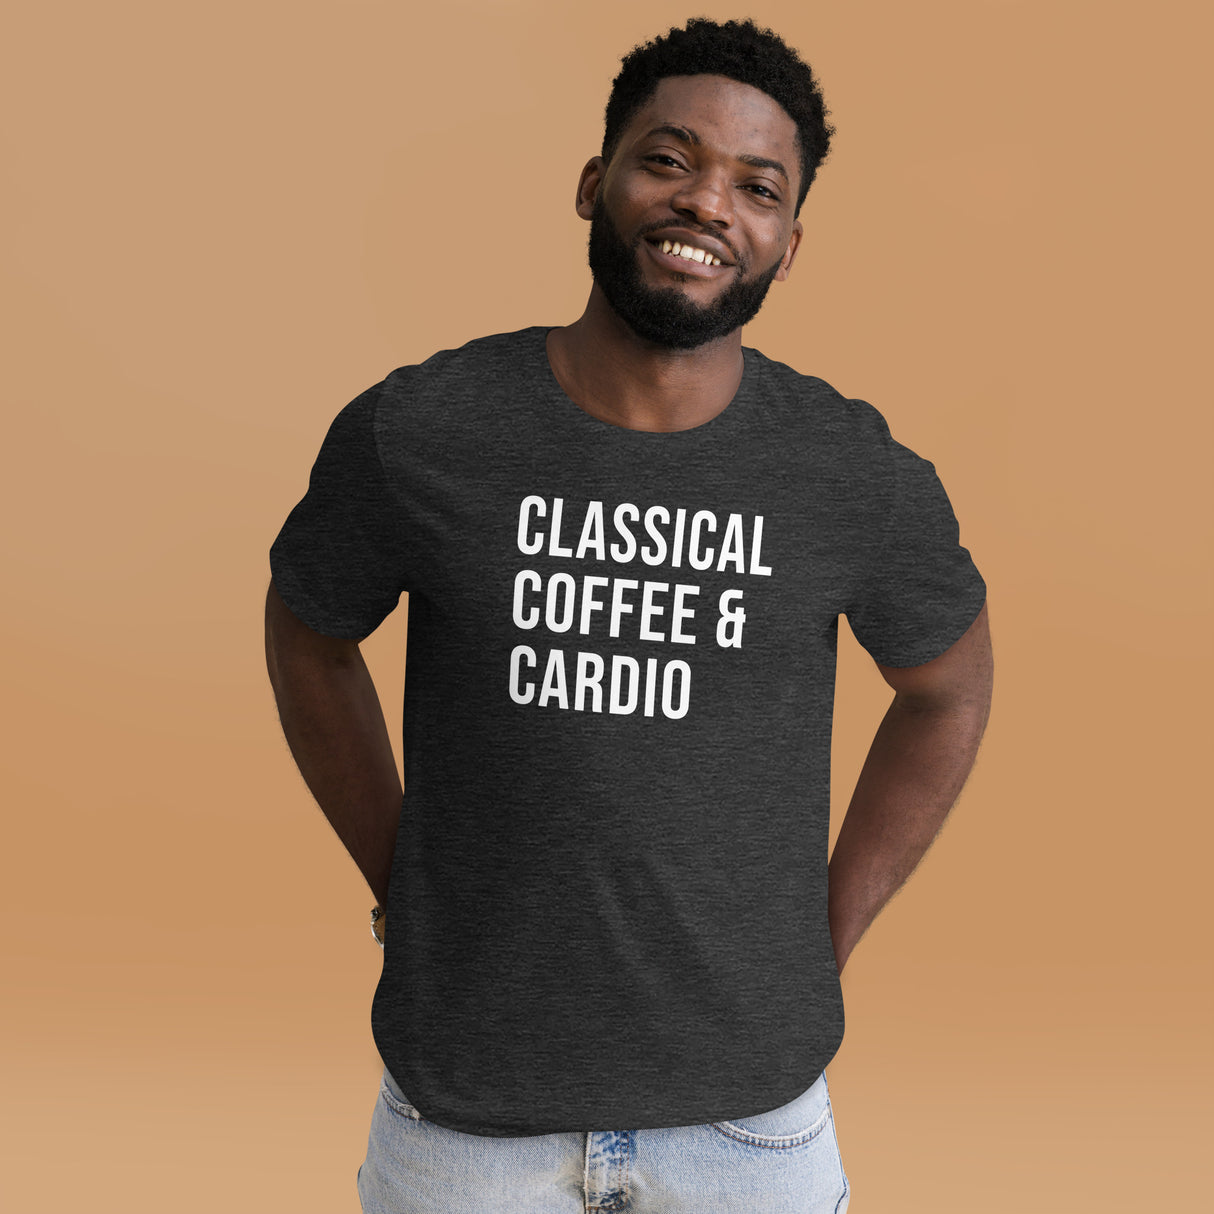 Classical Coffee and Cardio Men's Gym Shirt